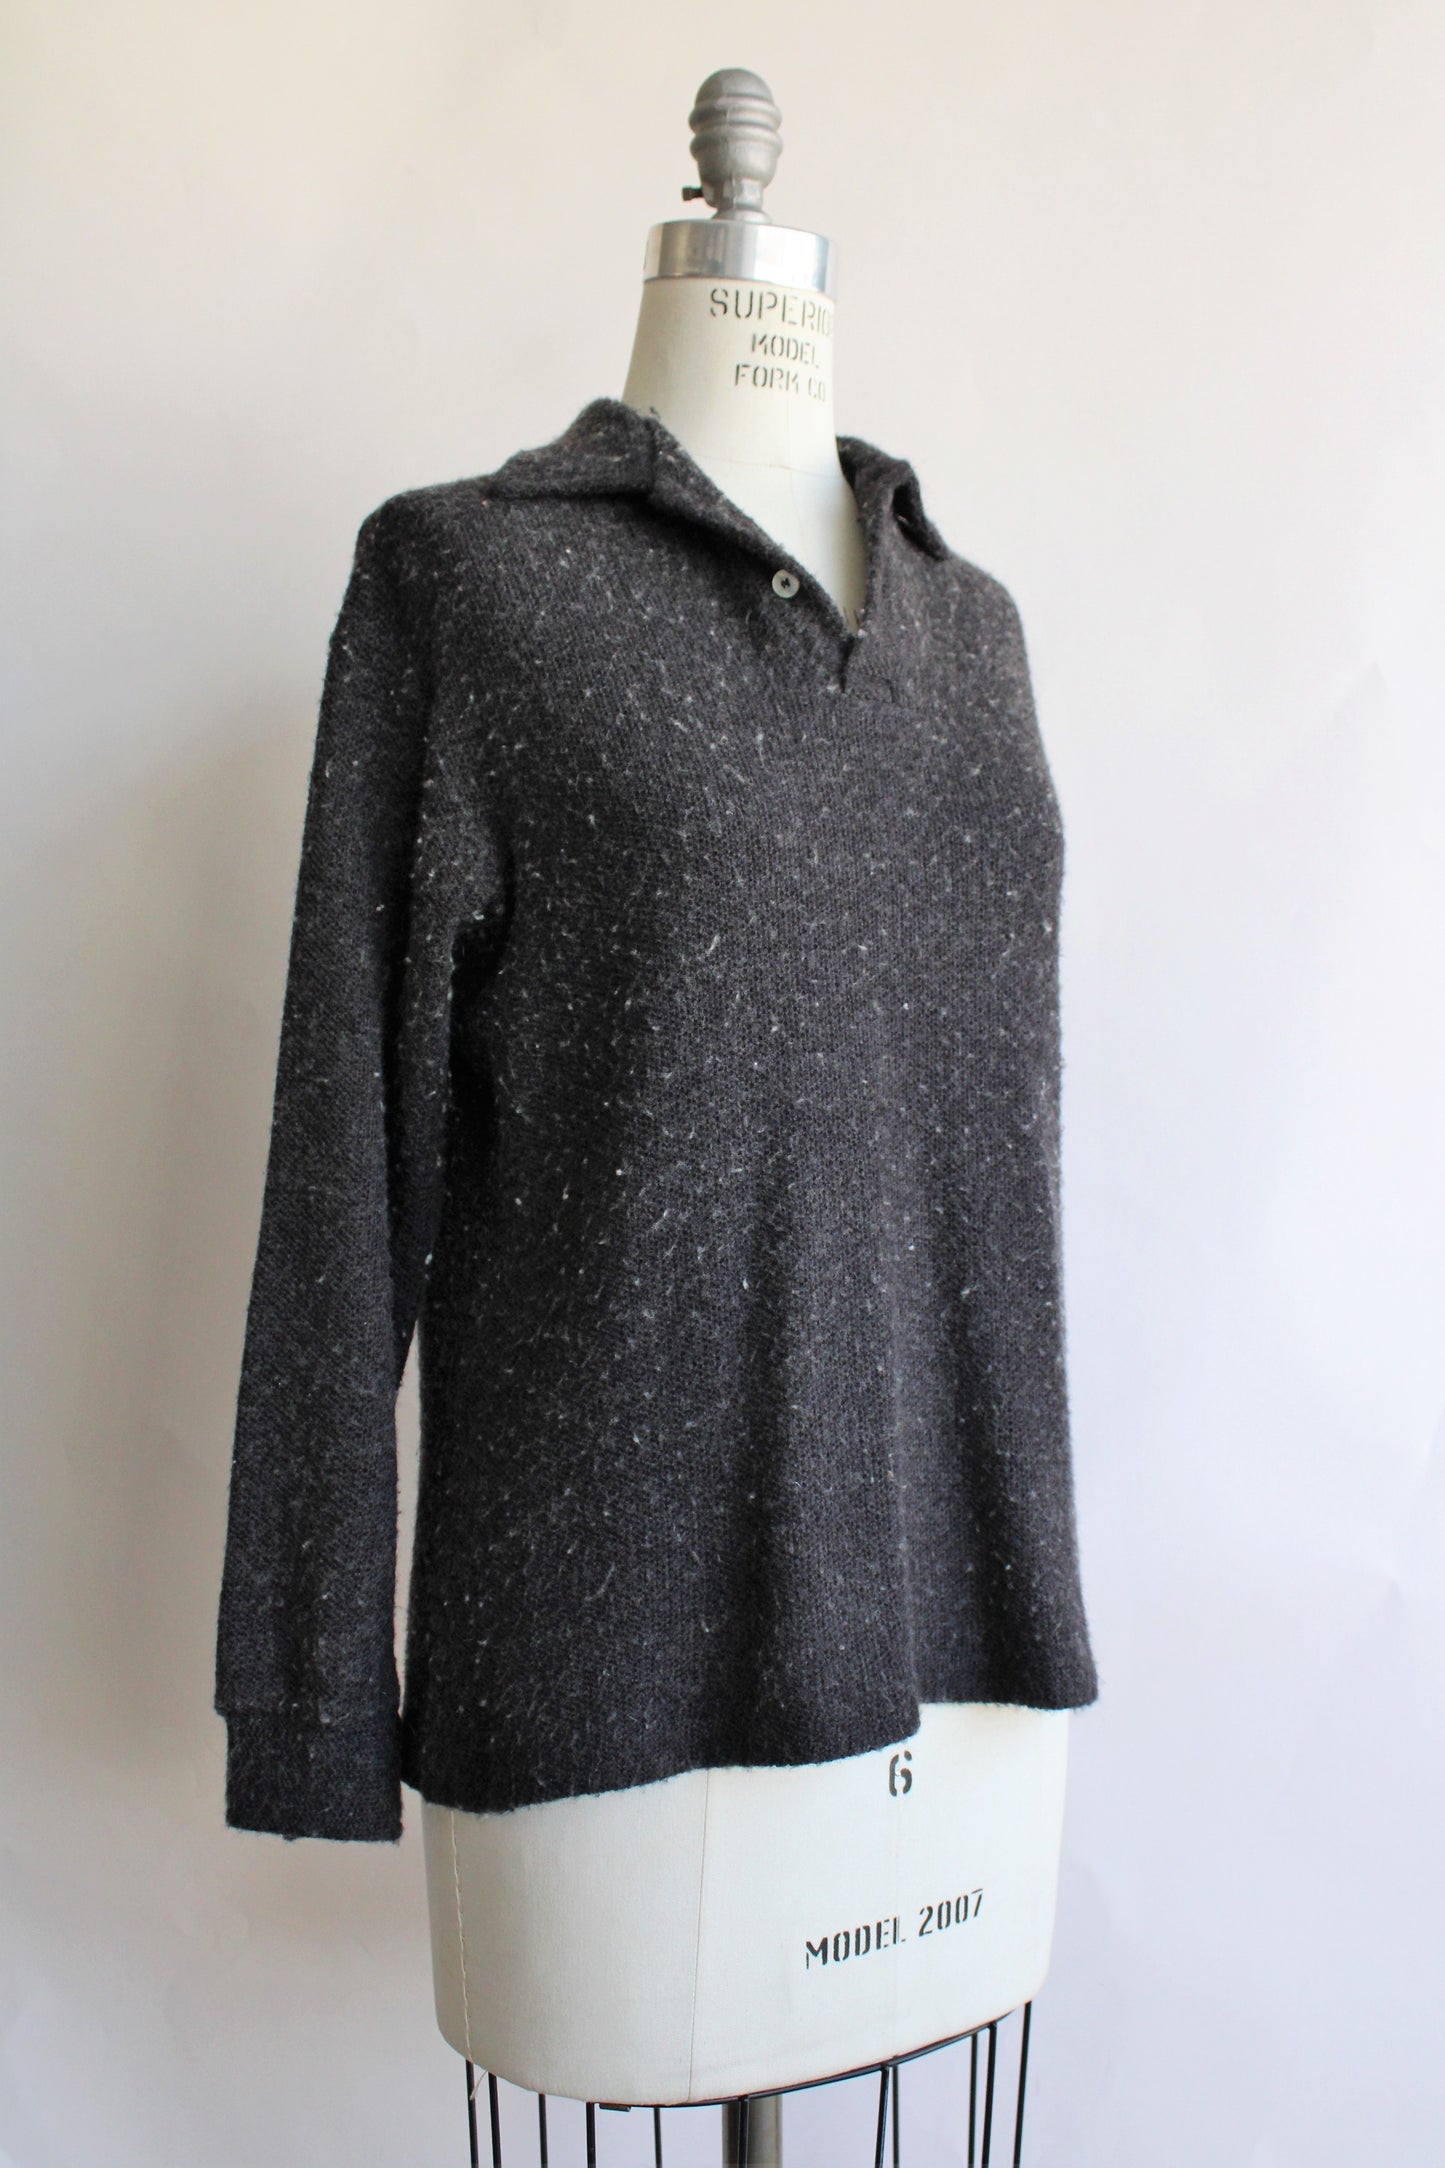 Vintage 1950s 1960s Charcoal Gray Hathaway SweaterVintage 1950s 1960s Charcoal Gray Hathaway Sweater